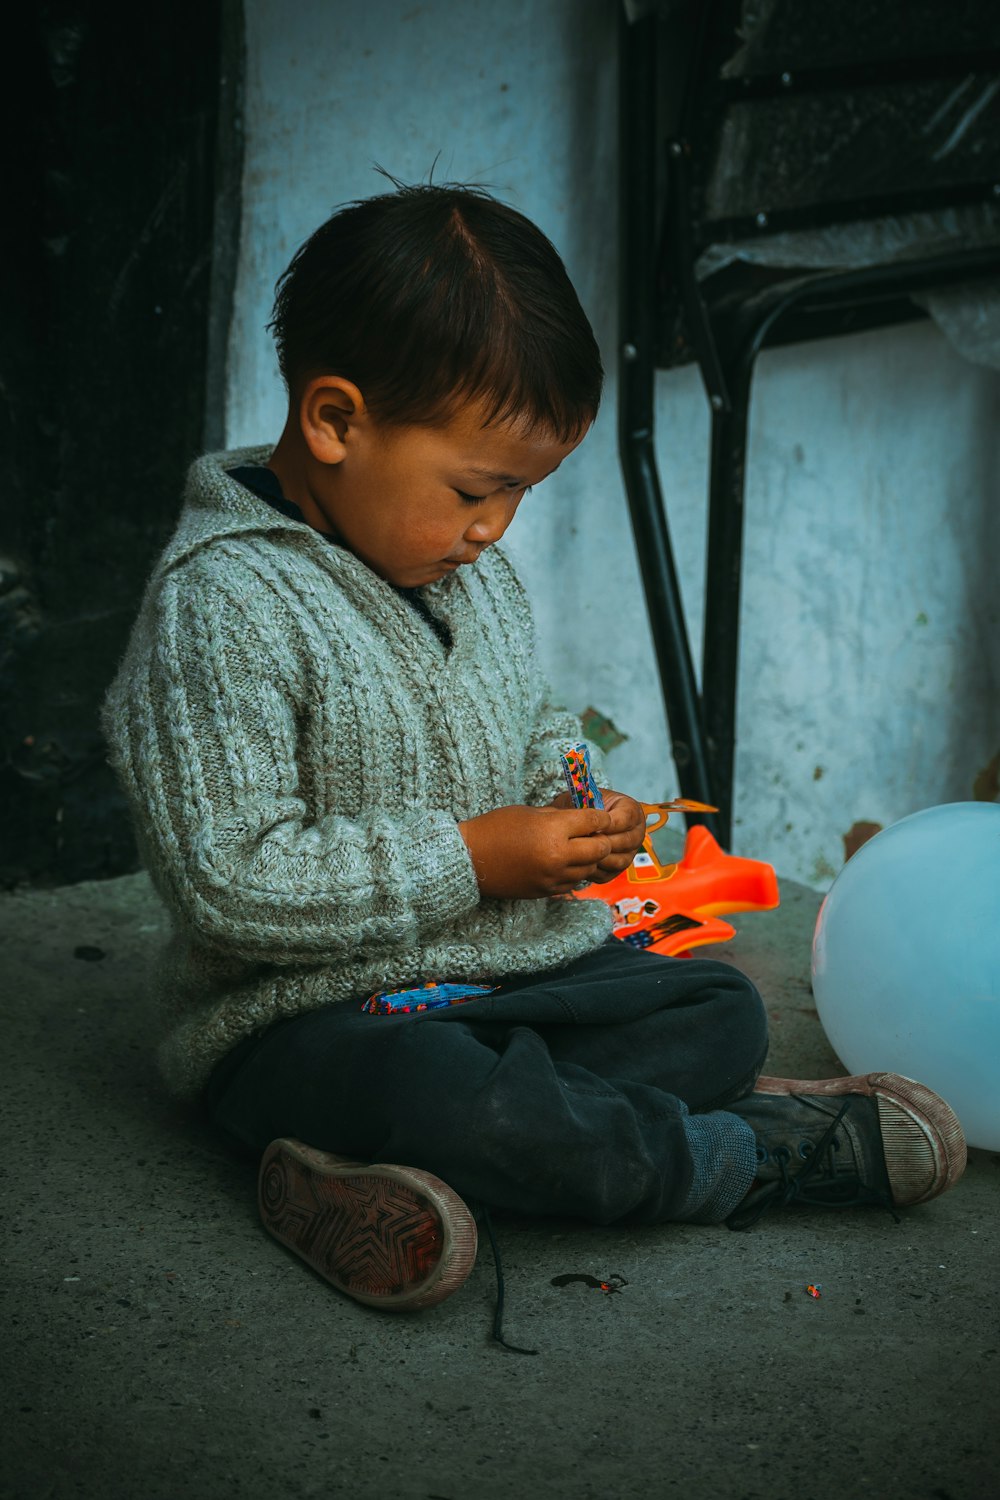 a young boy sitting on the ground playing with a toy